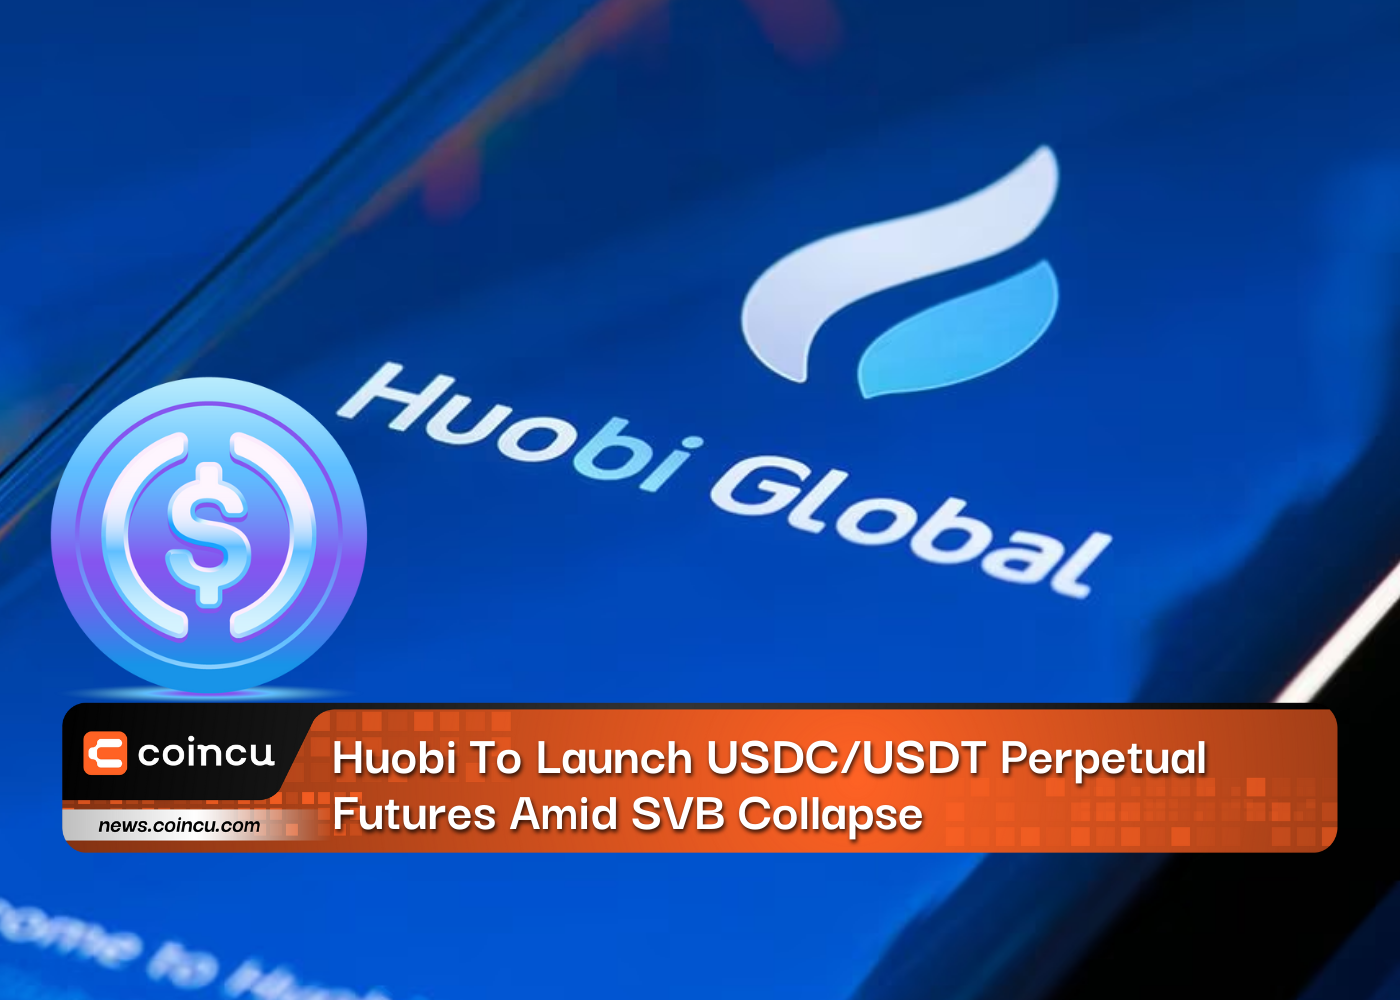 Huobi To Launch USDC/USDT Perpetual Futures Amid SVB Collapse